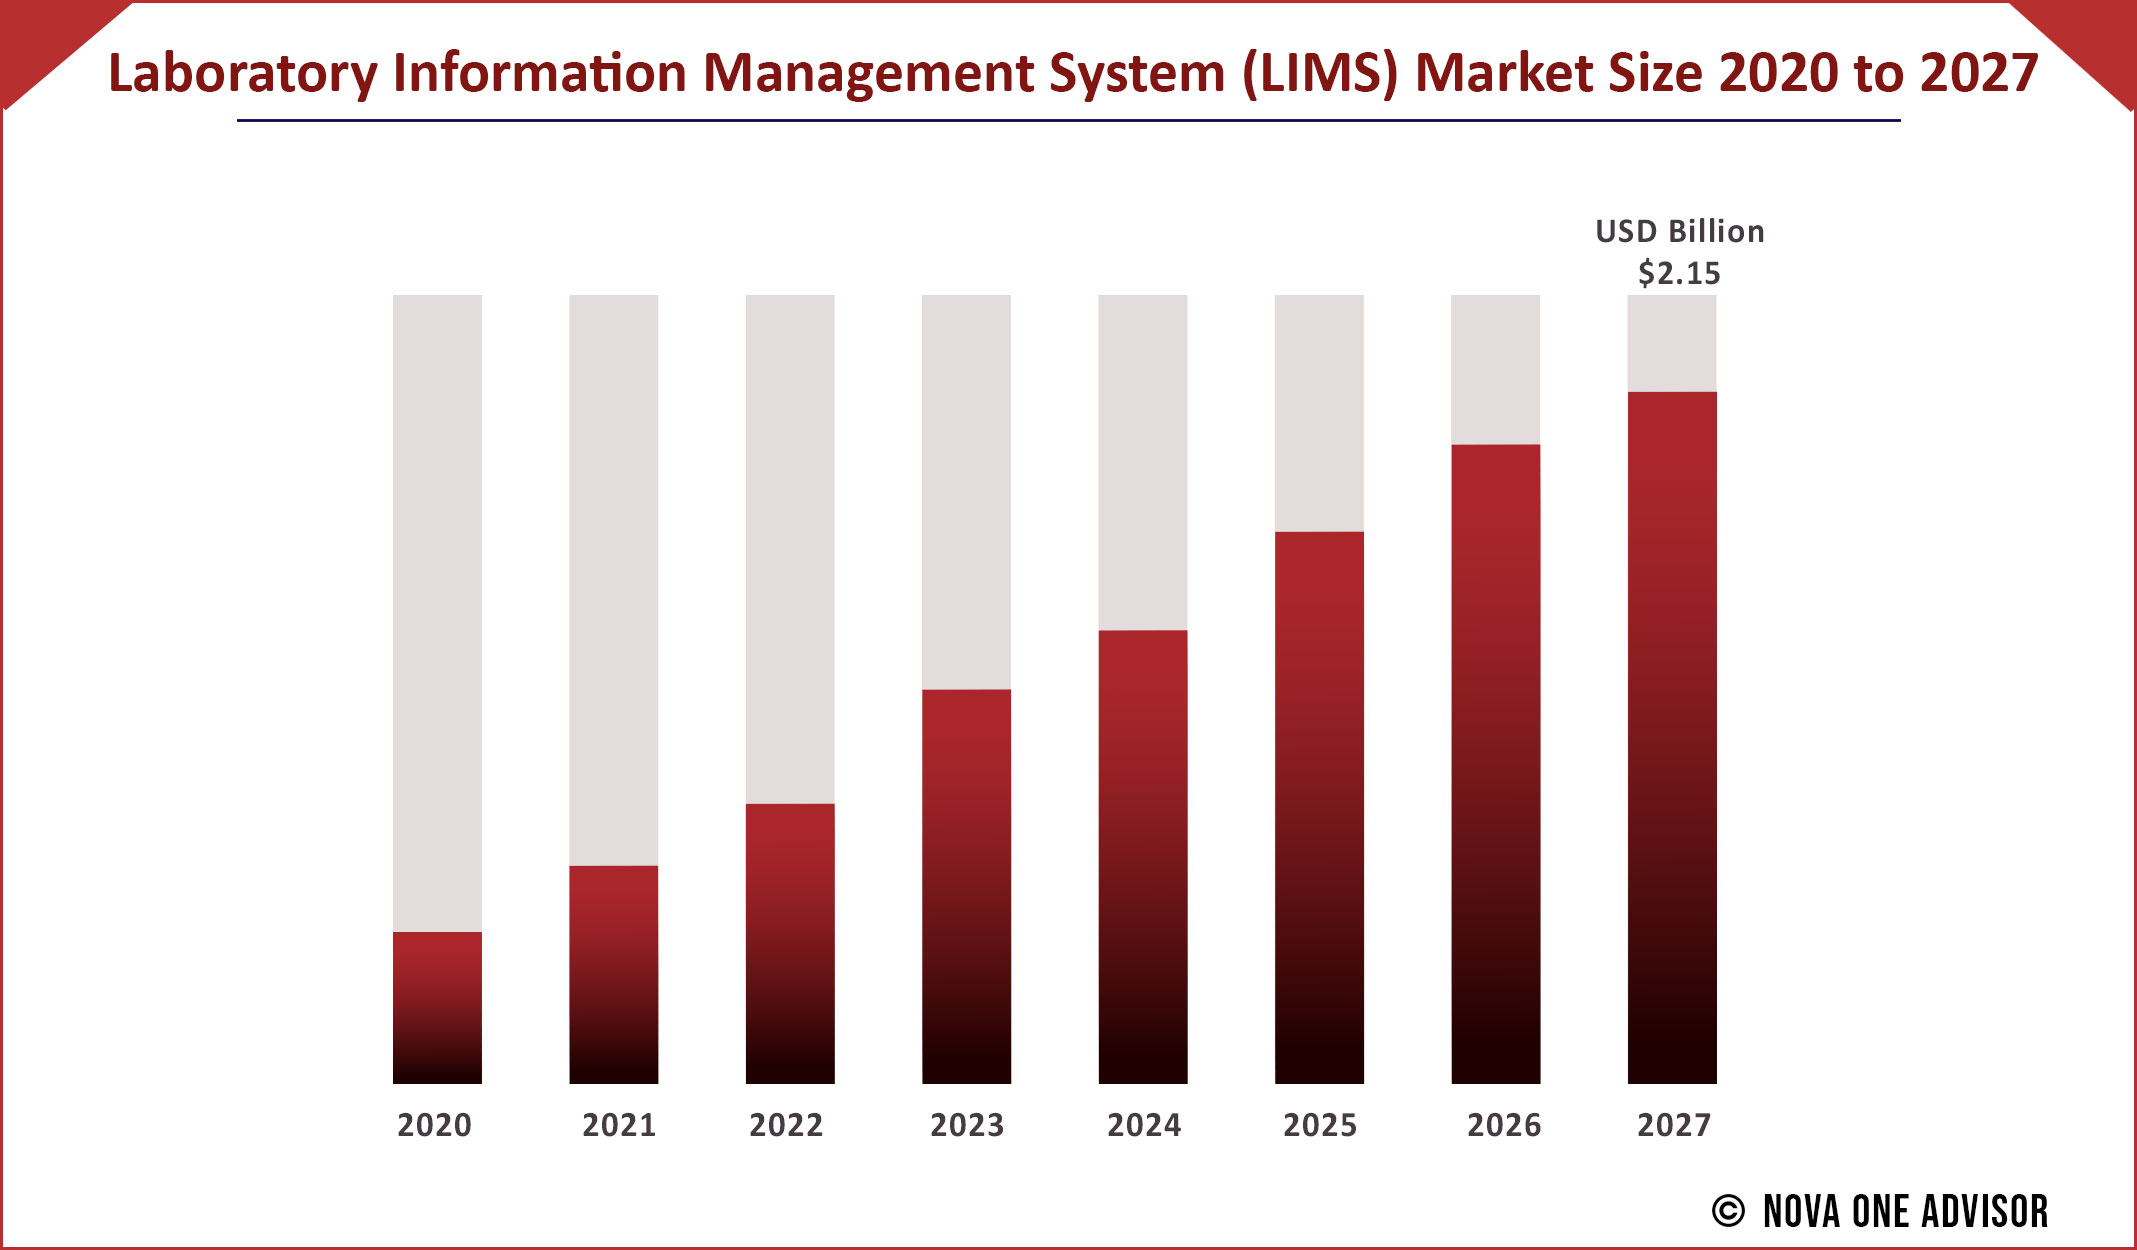 Laboratory Information Management System (LIMS) Market Size 2020 to 2027